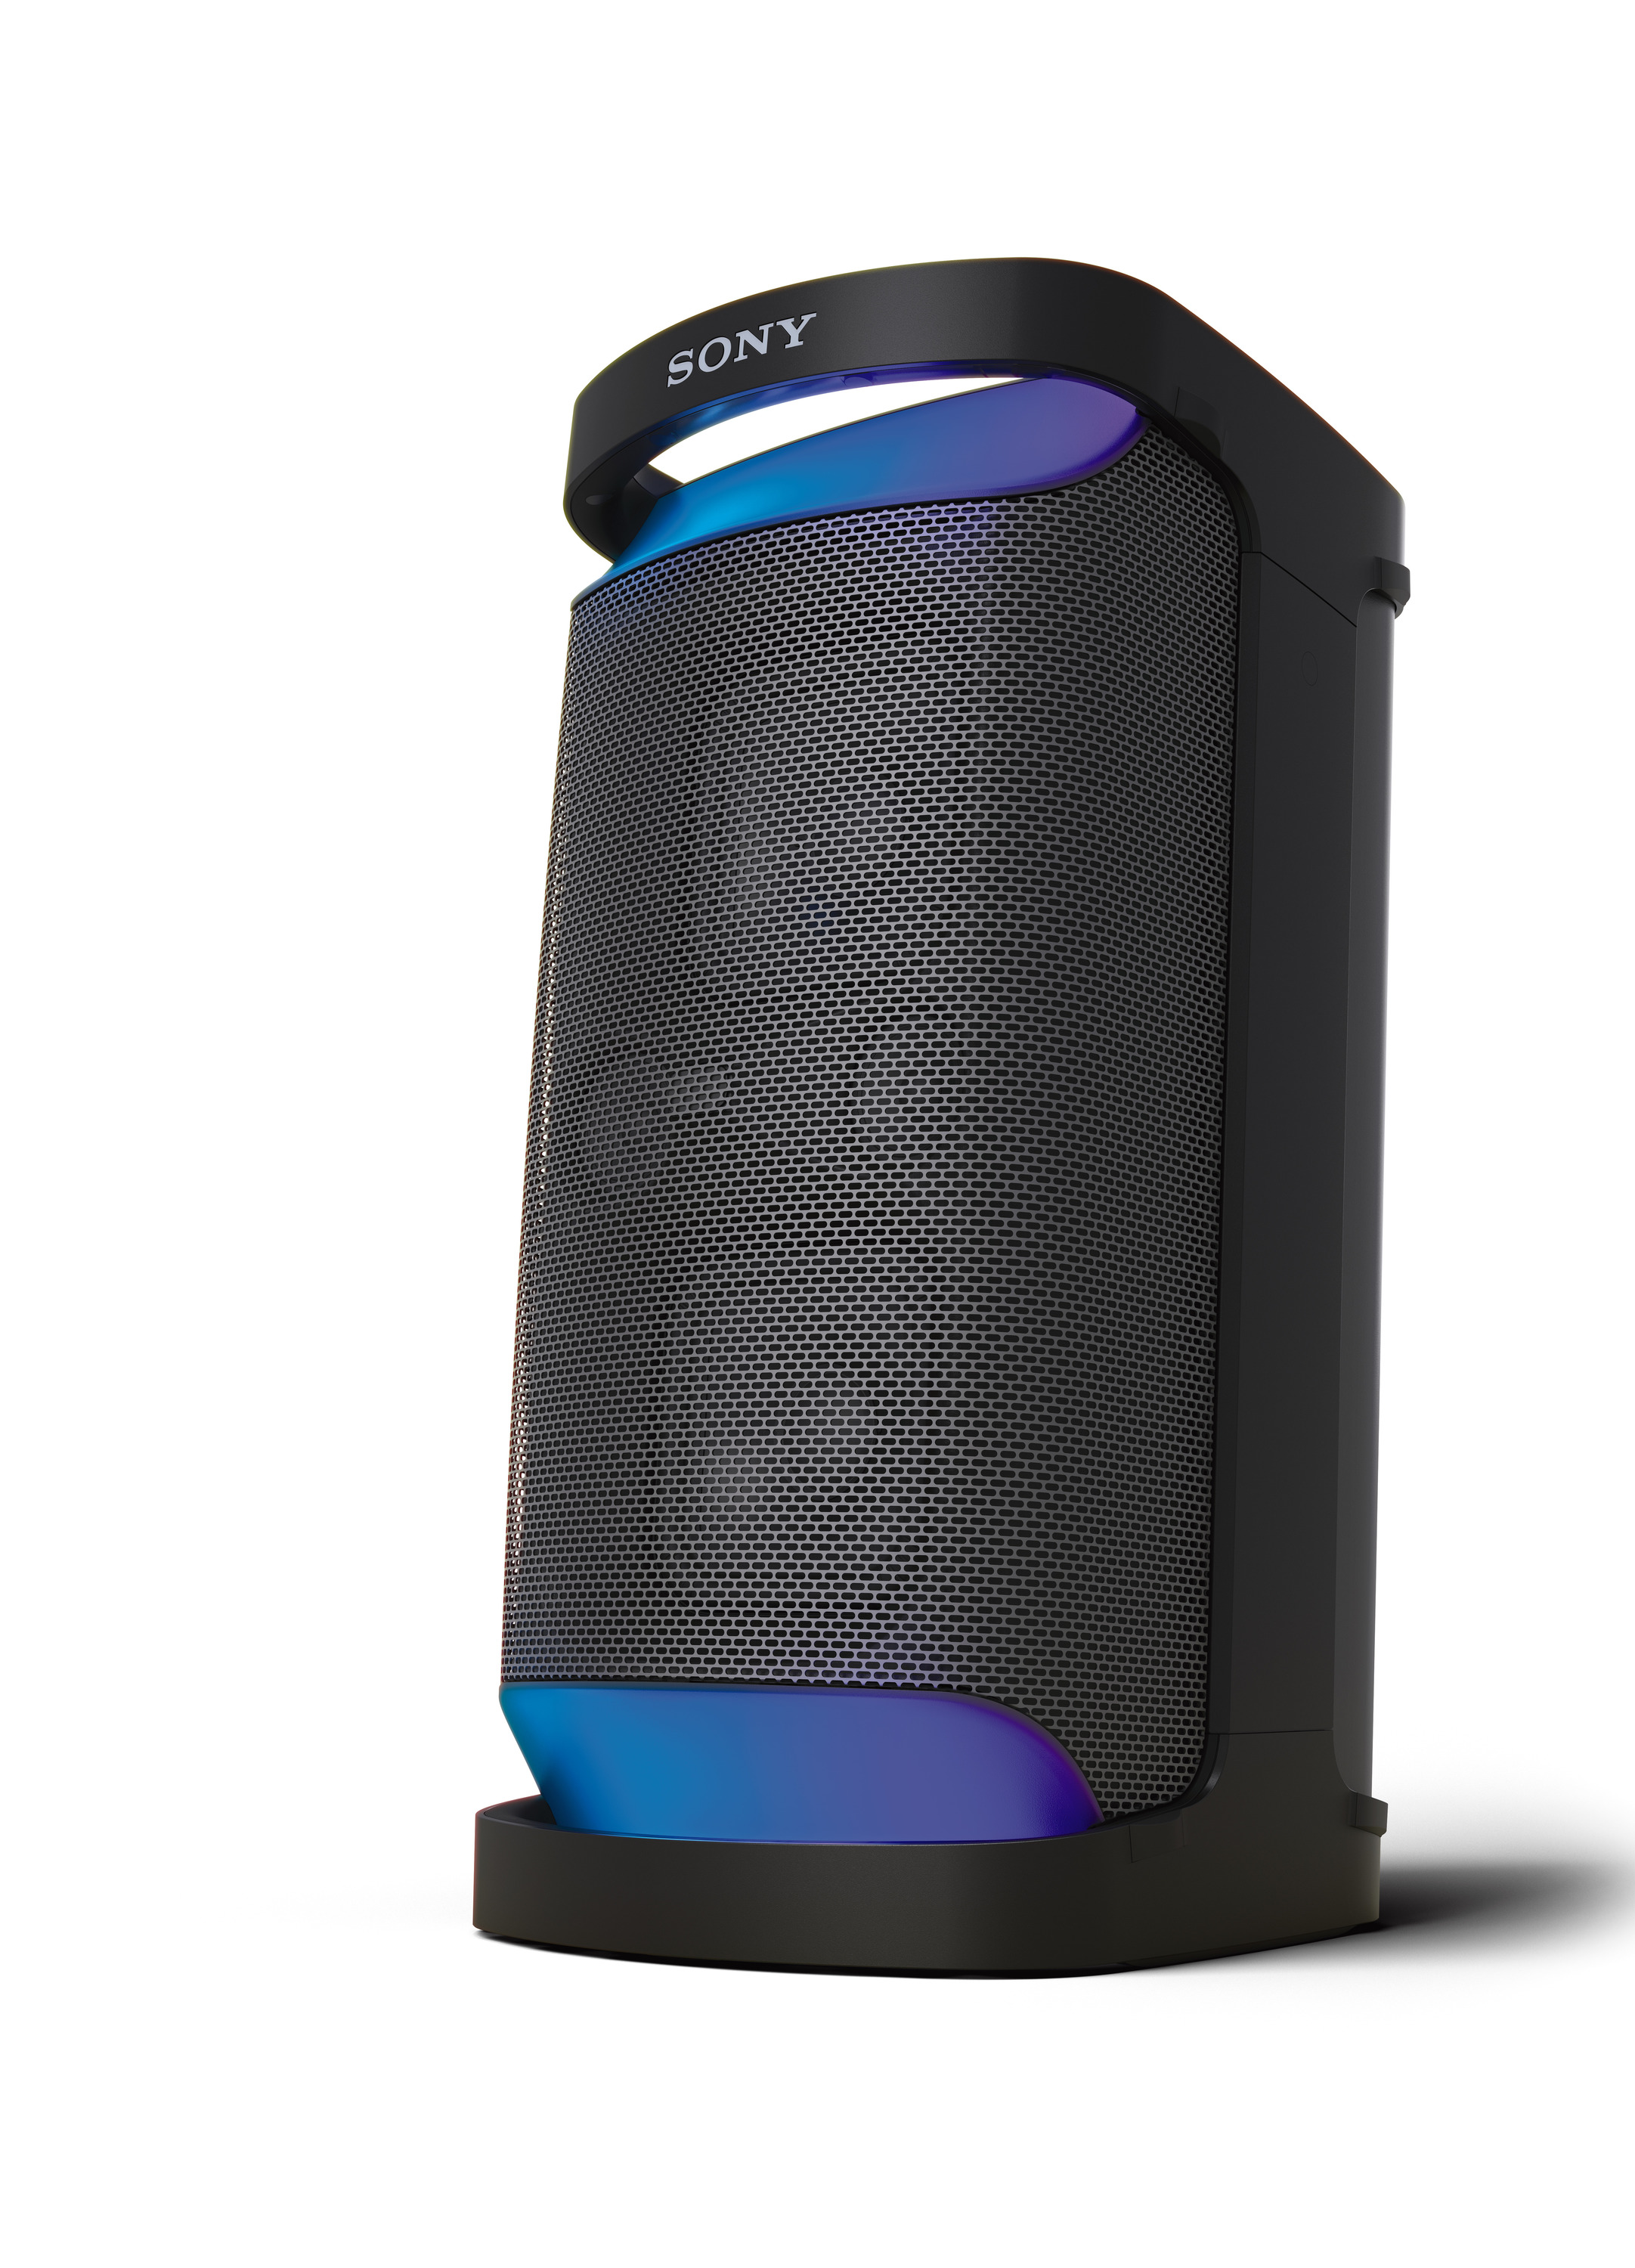 Sony SRS-XP500 X-Series Wireless Portable-BLUETOOTH-Karaoke Party-Speaker IPX4 Splash-resistant with 20 Hour-Battery - image 1 of 17